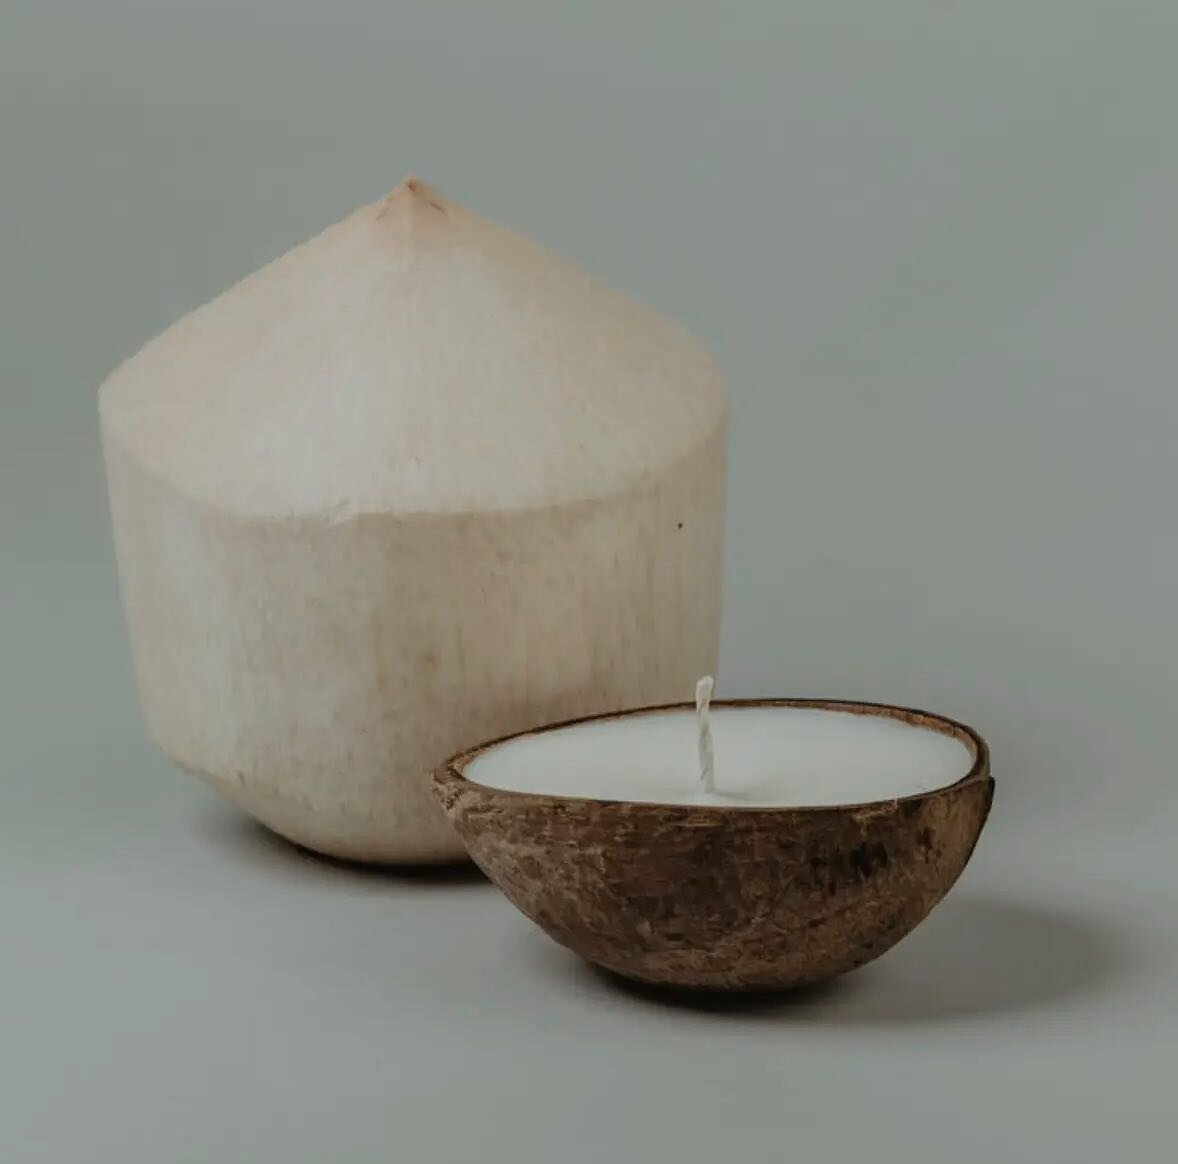 New Candle Alert 🔔 

All soy &amp; coconut wax 
5.5 ounce, 20-25 hrs of burn time

Scents:
Coconut Cream
Cashmere Cardigan 
Evergreen
White Birch
Black Cardamom &amp; Cream 

$15 each